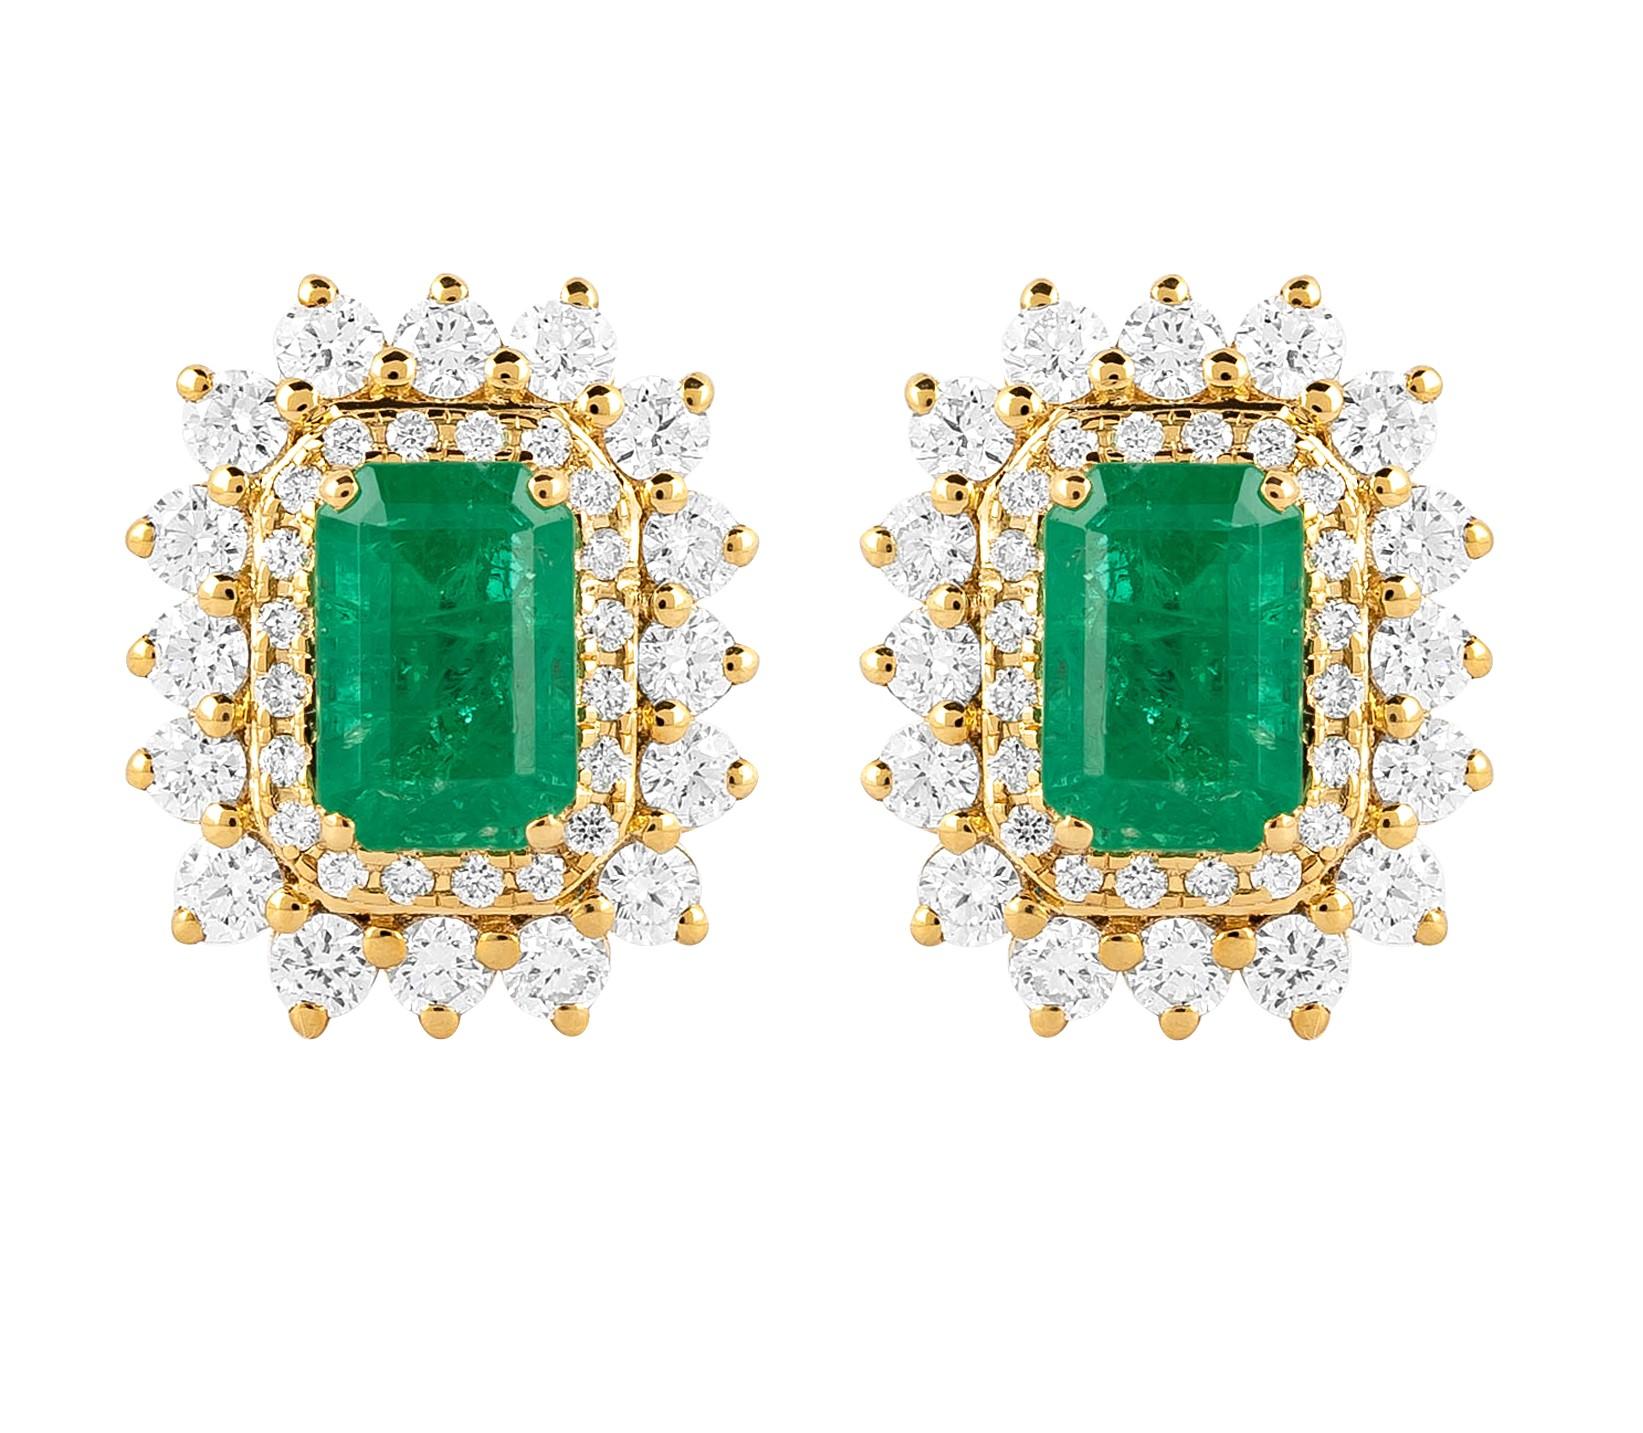 Contemporary 18 Karat Gold 1.96 Carat Diamond and Emerald Solitaire Cocktail Stud Earrings For Sale